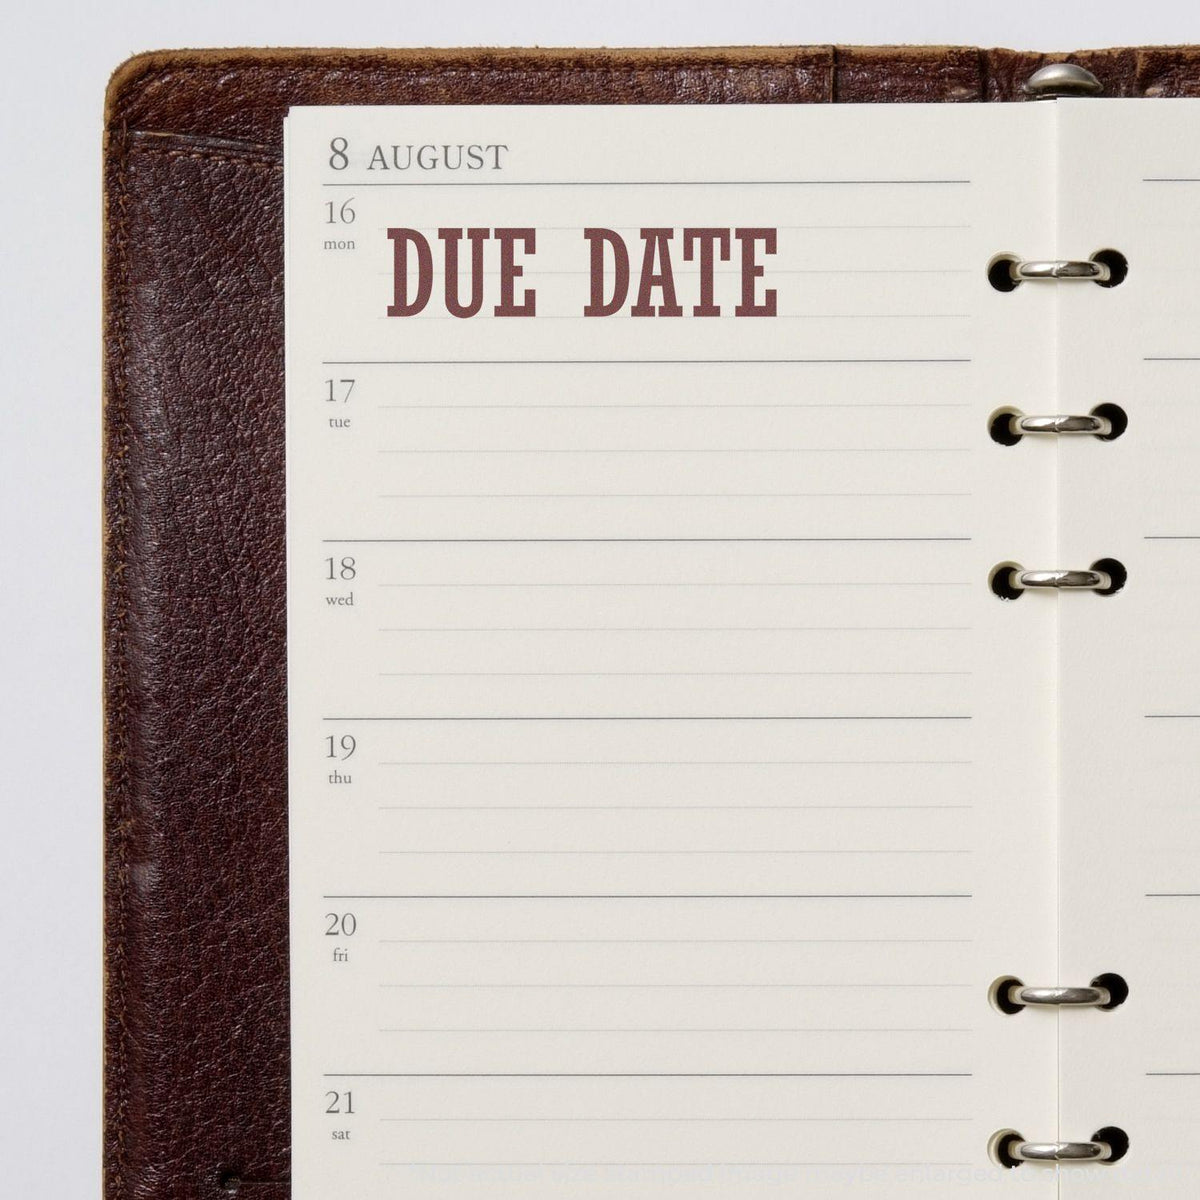 Due Date Rubber Stamp Lifestyle Photo